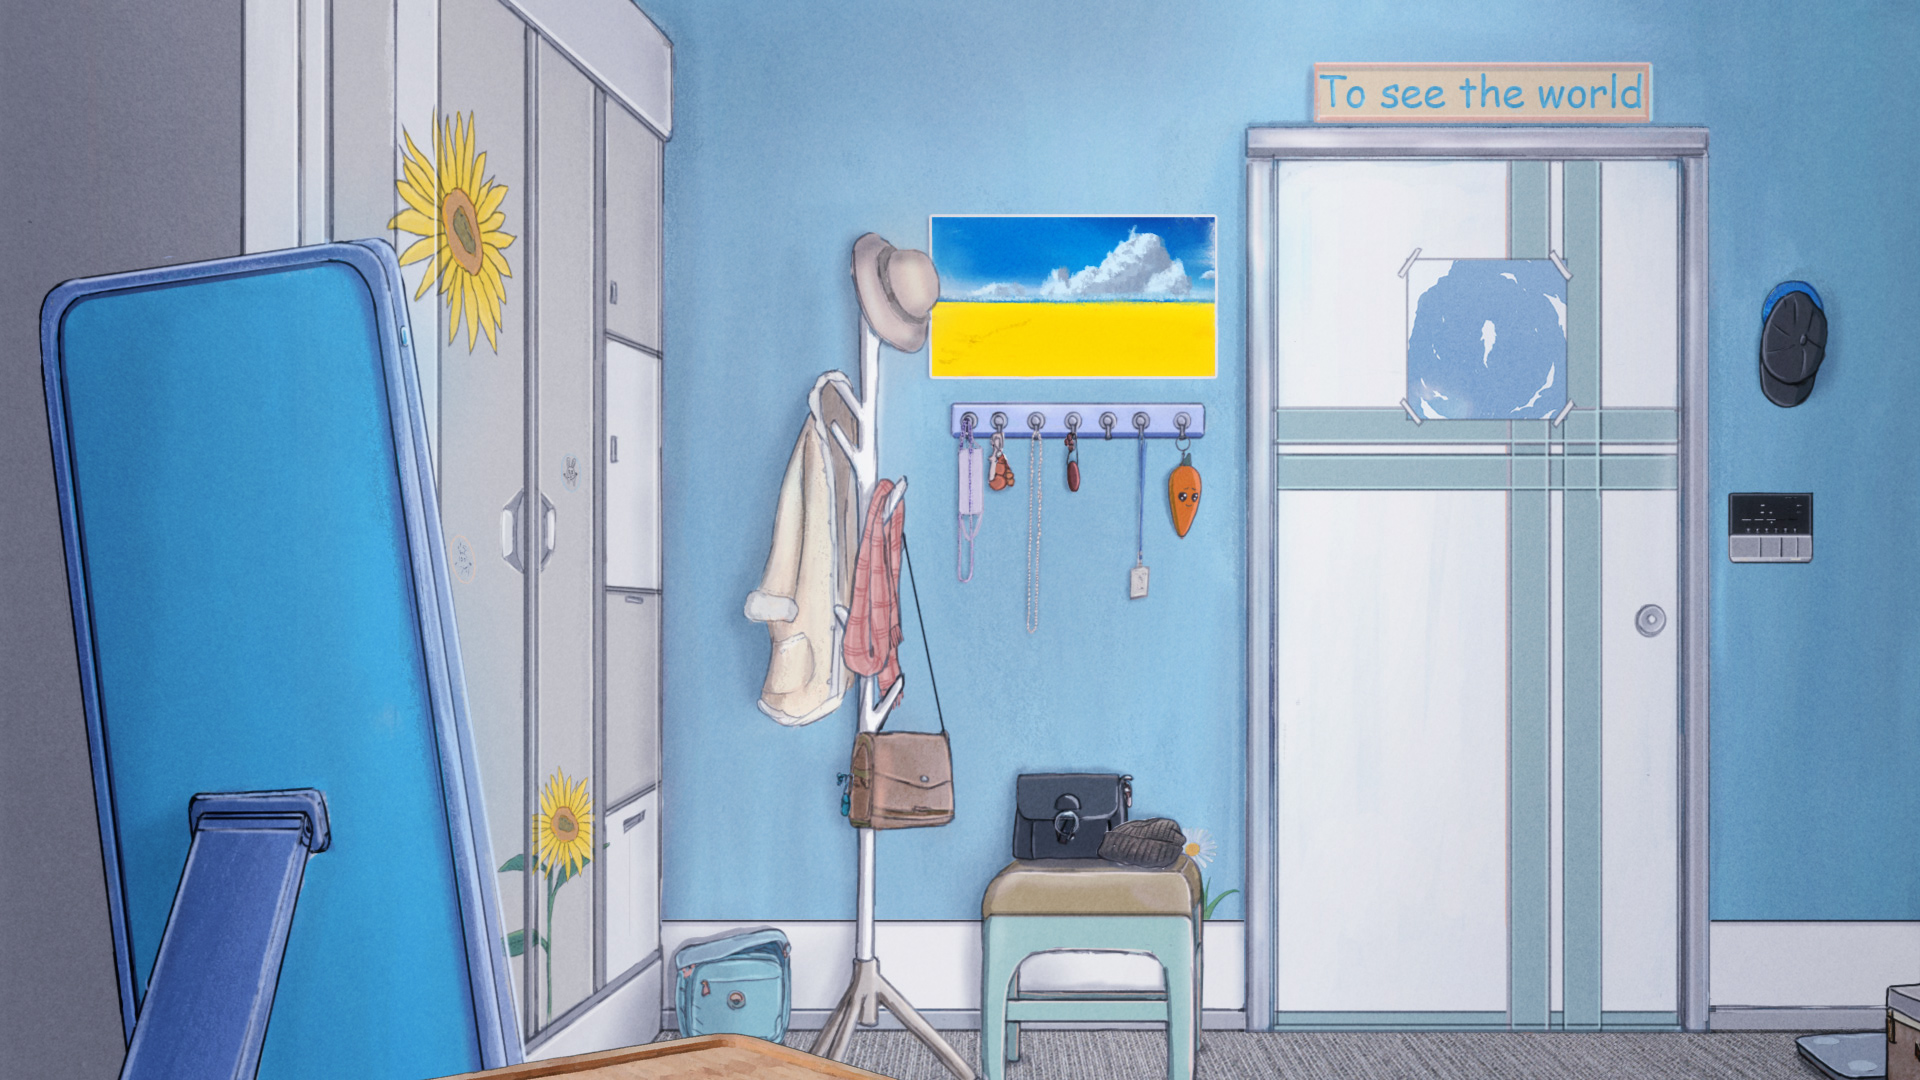 Anime 1920x1080 digital art anime winter room living rooms sunflowers picture-in-picture wardrobe